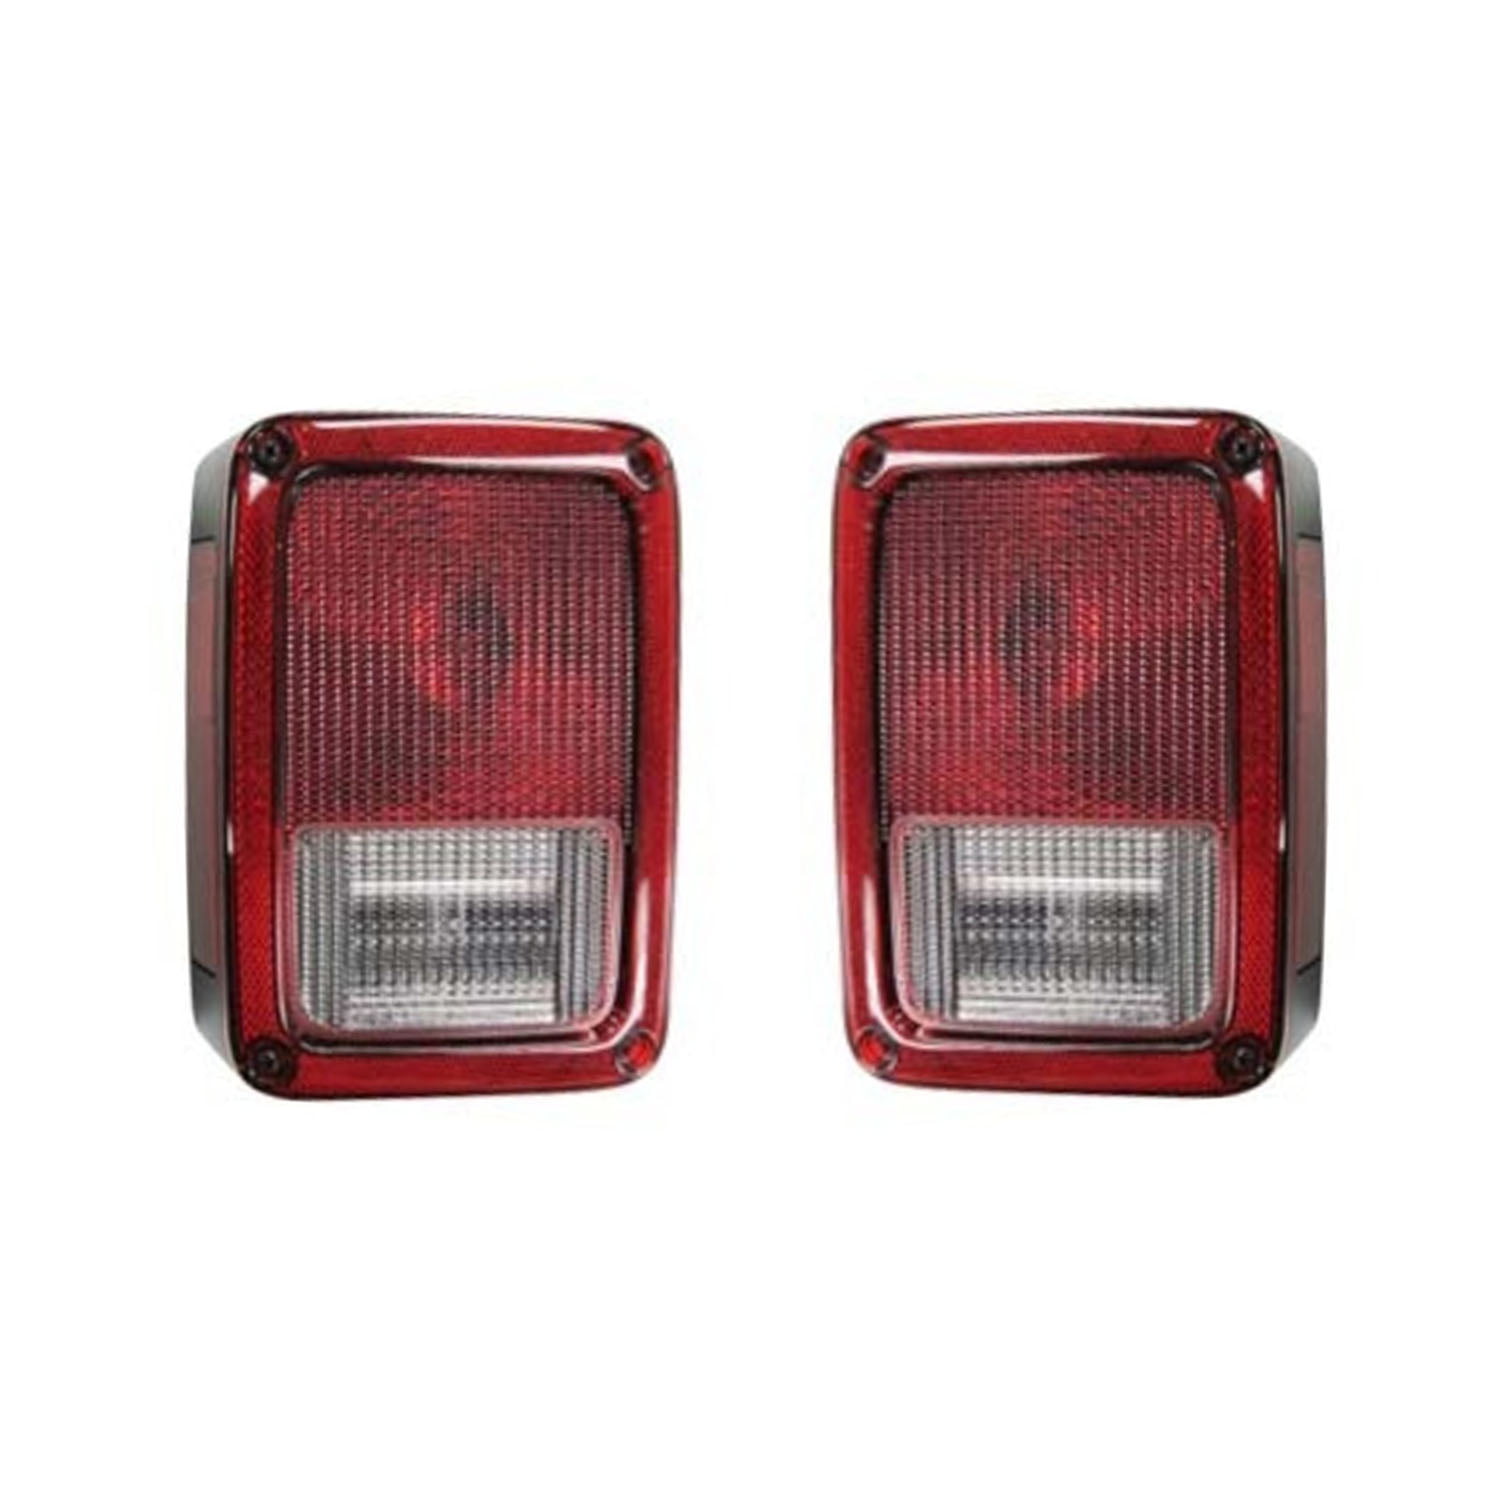 New Tail Light Pair Fits Jeep Wrangler 2007 2008 2009 2010 Ch2801177  55077891Ag 